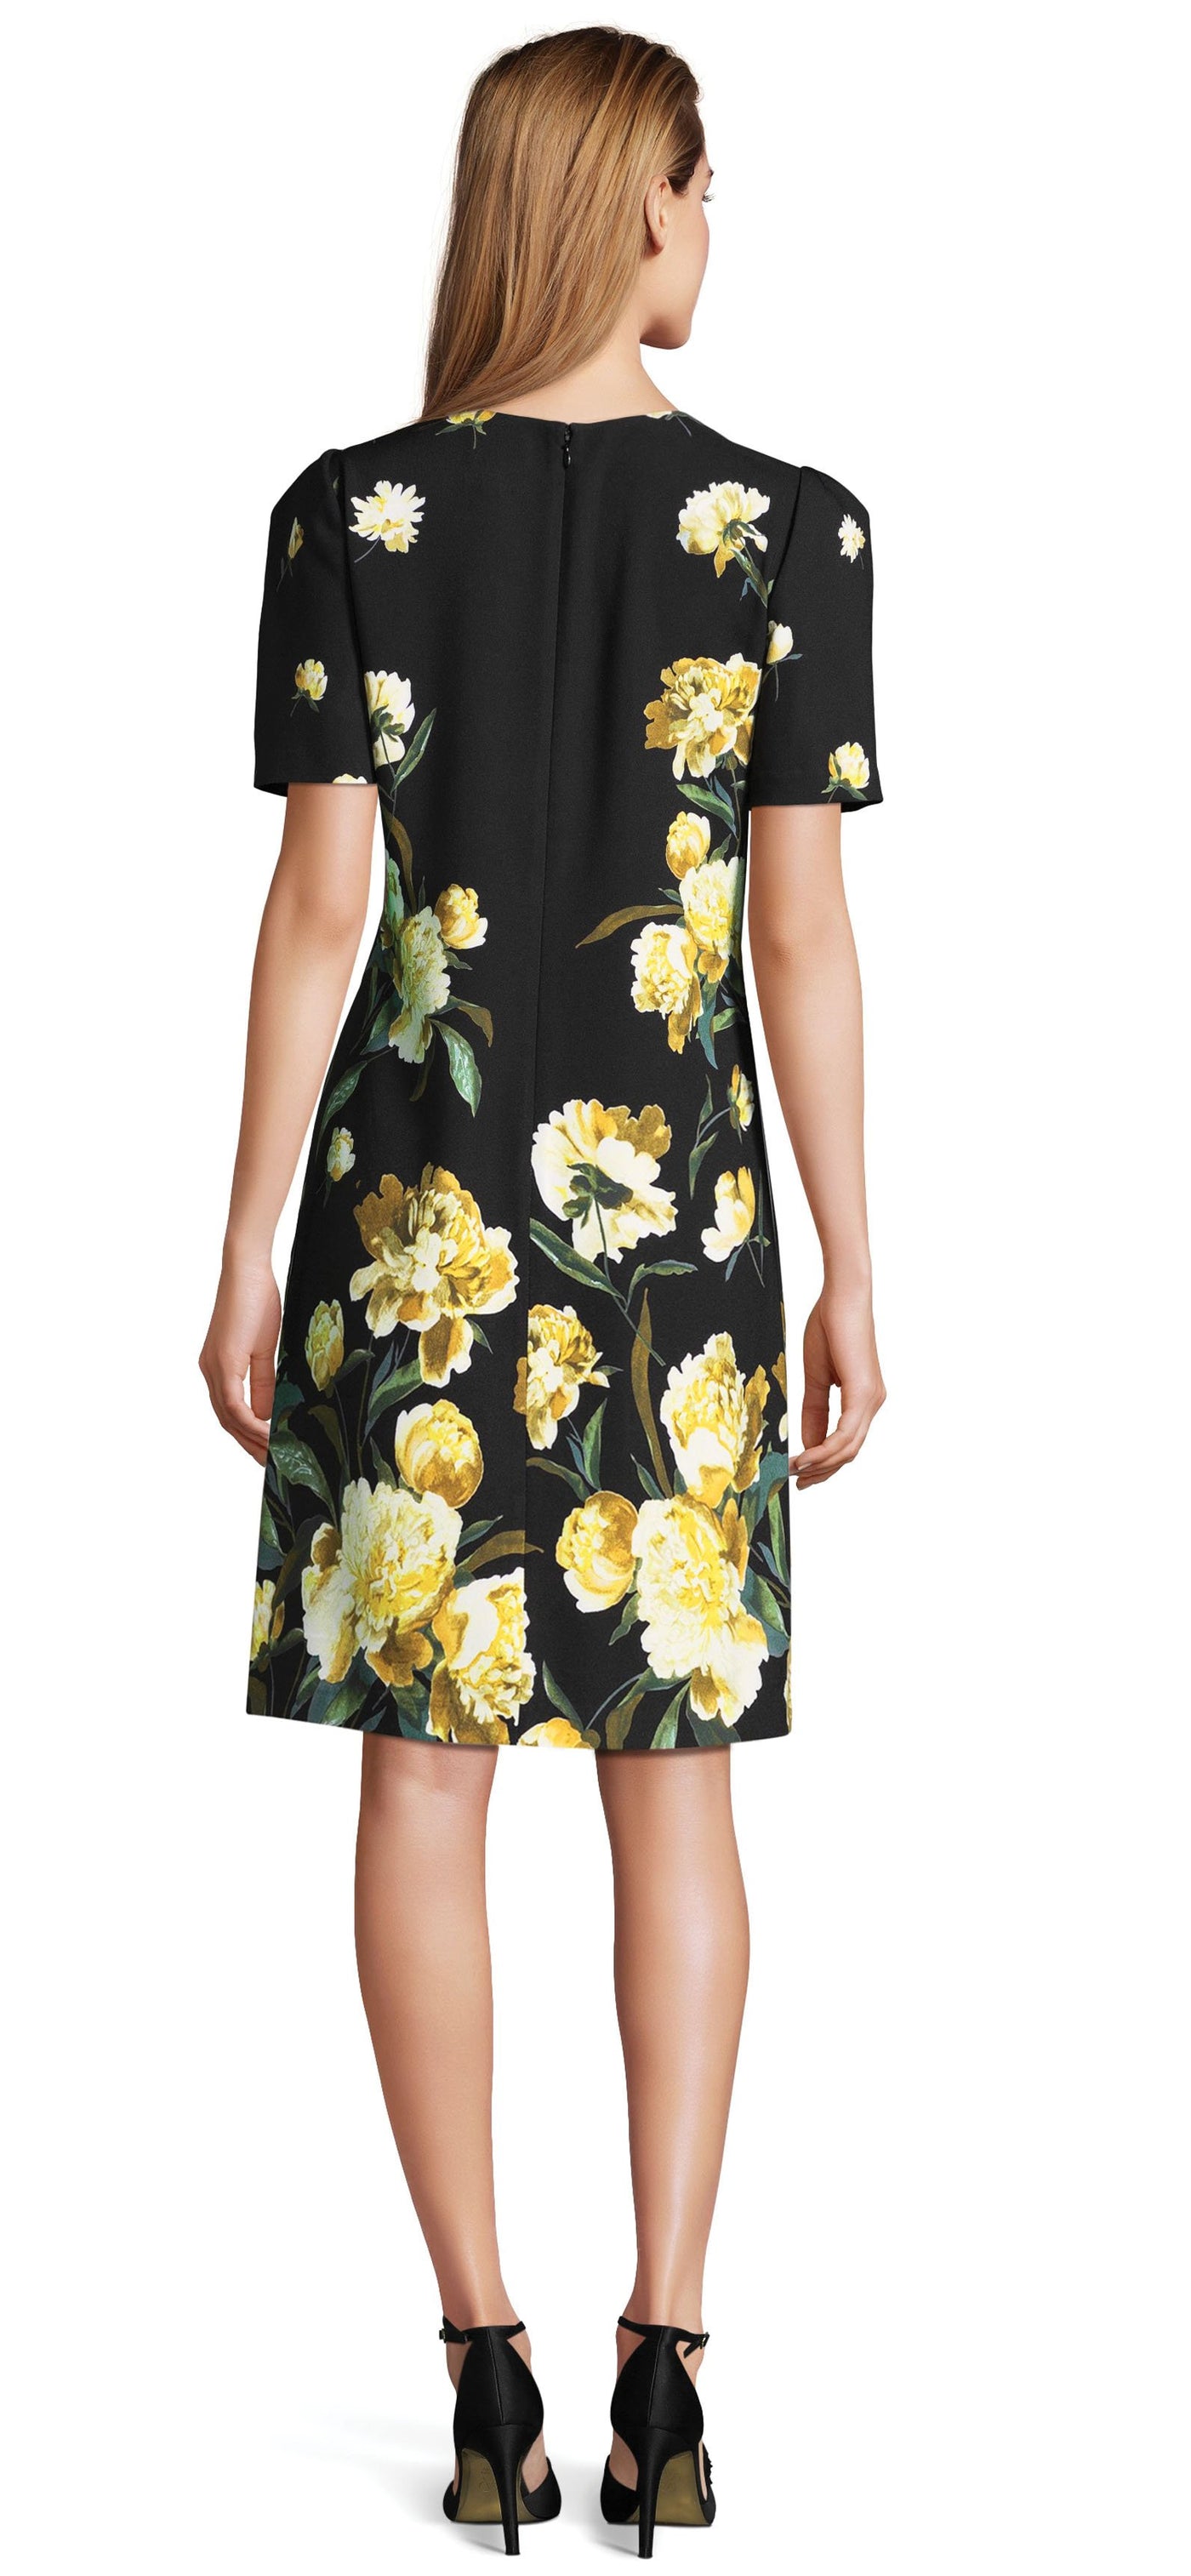 Adrianna Papell - AP1D102017 Floral V-Neck Cocktail Dress In Black and Multi-Color